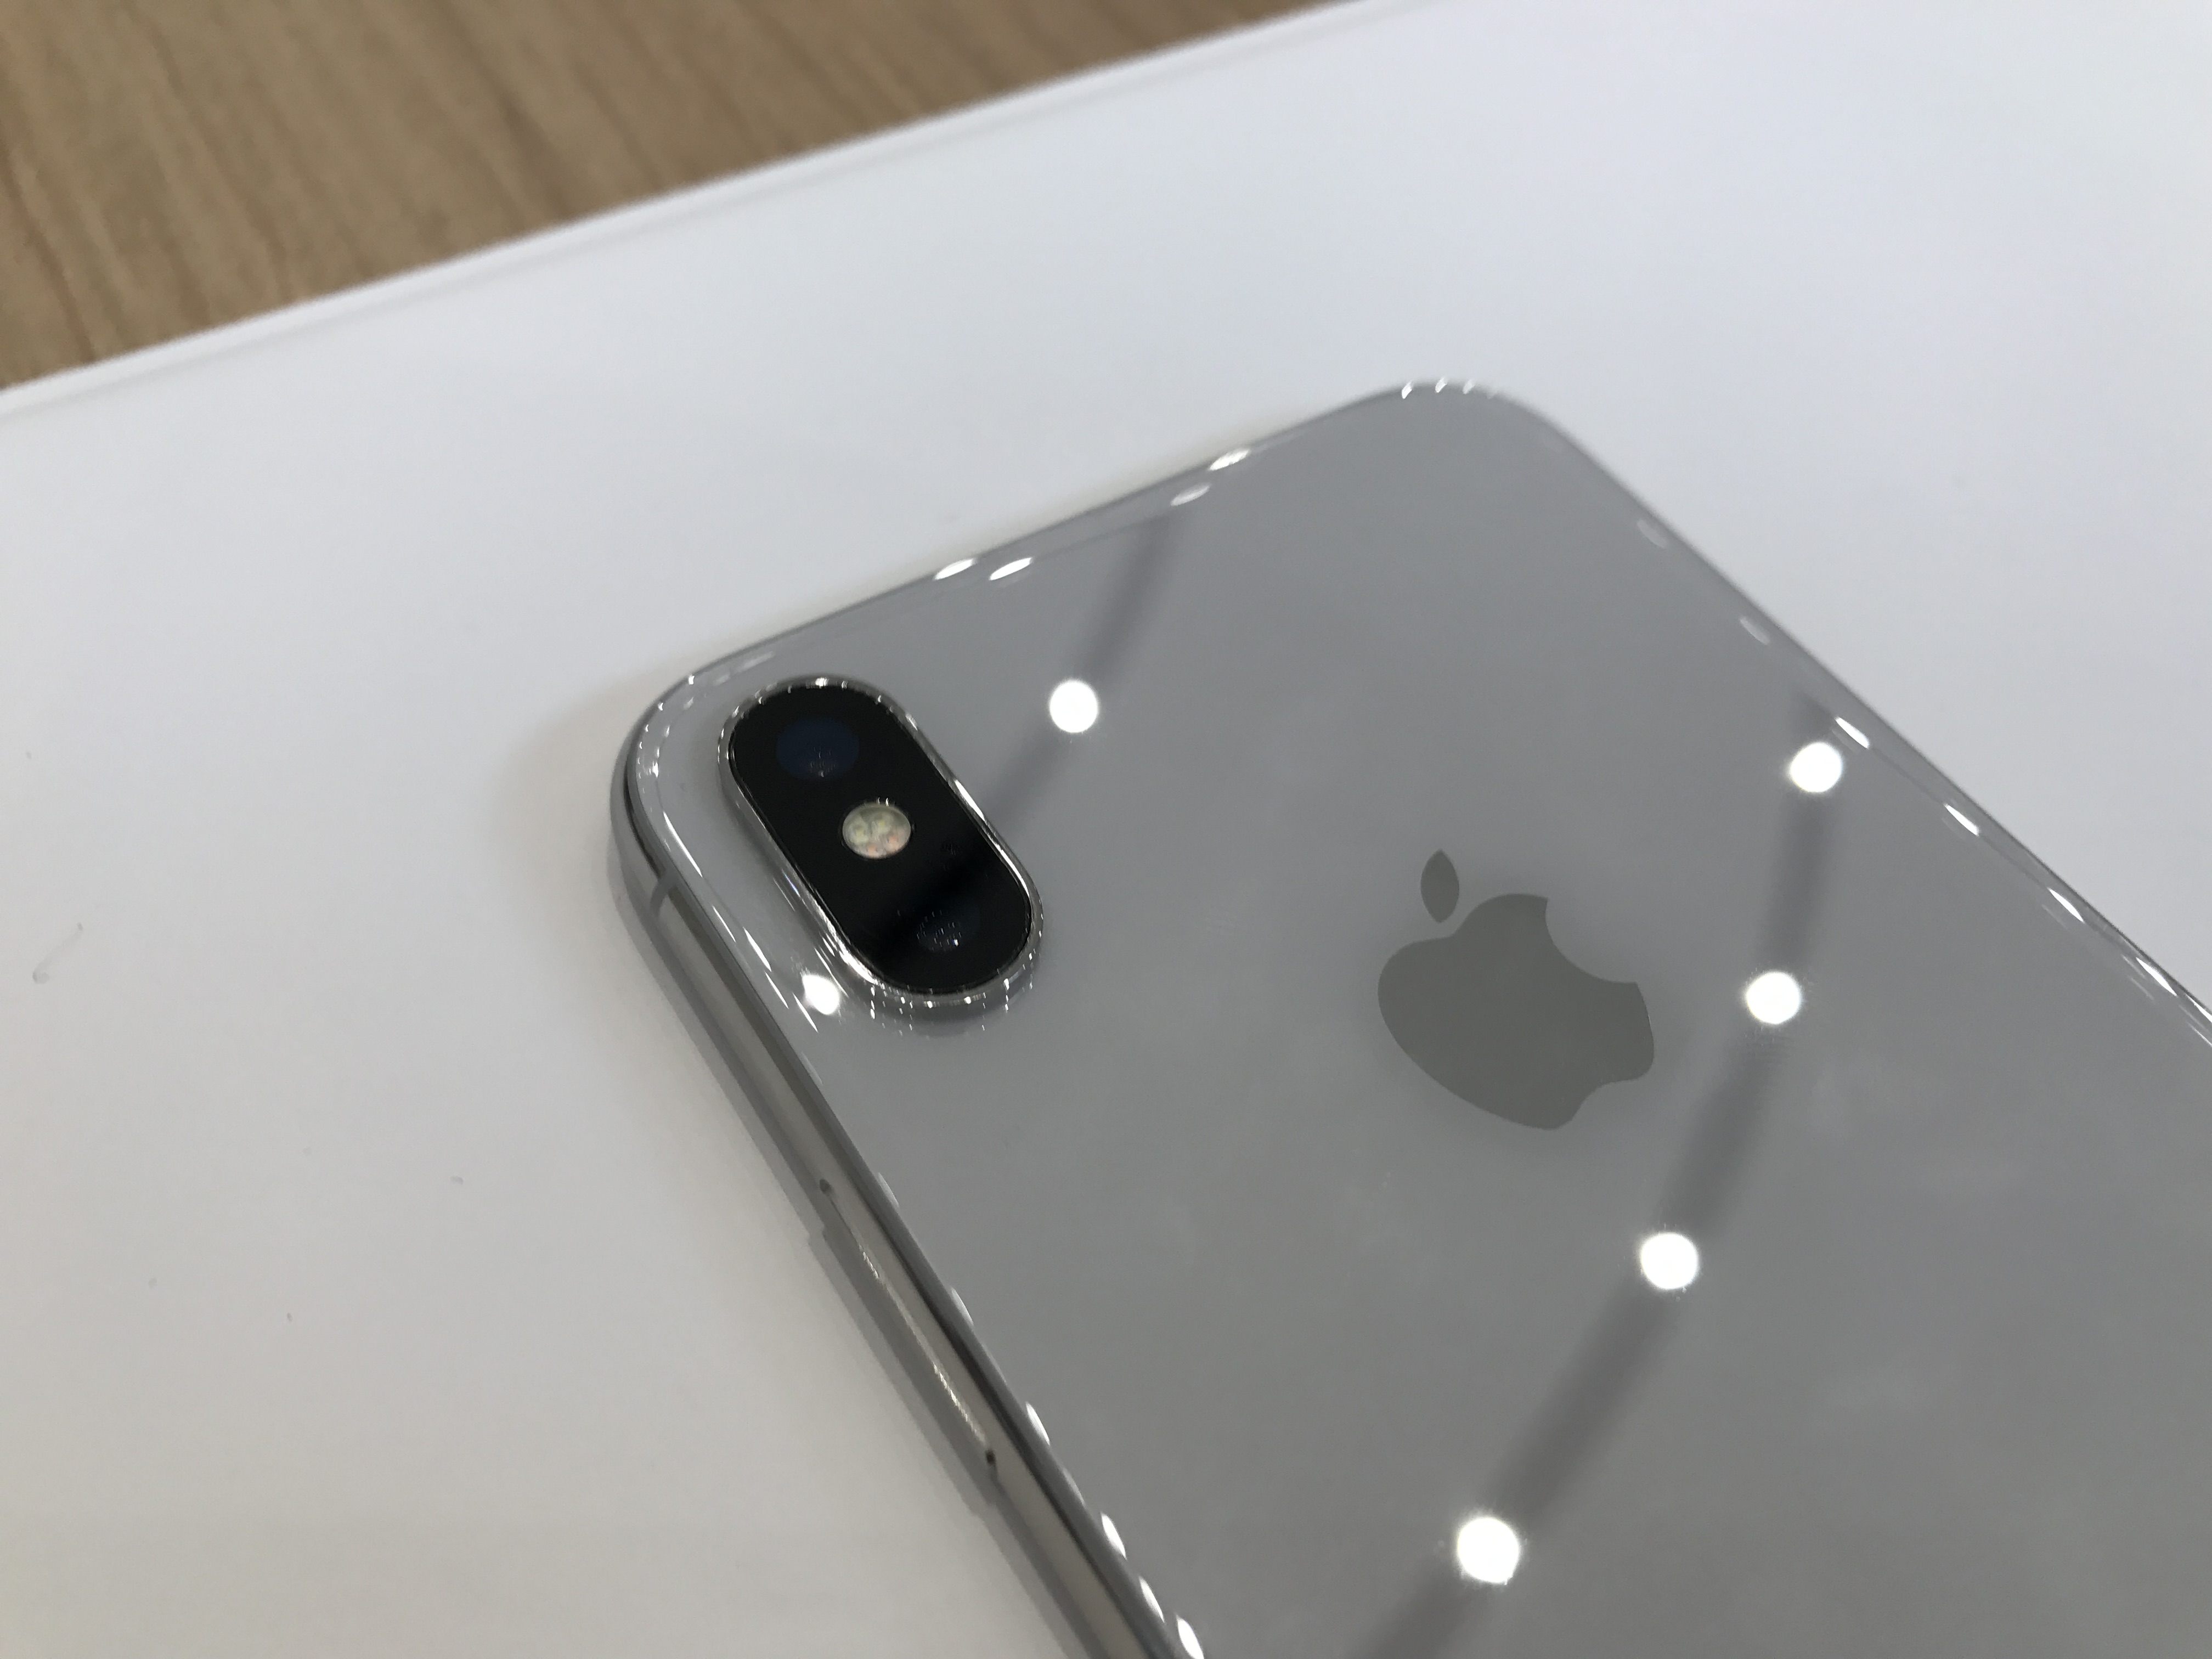 The rear iPhone X camera